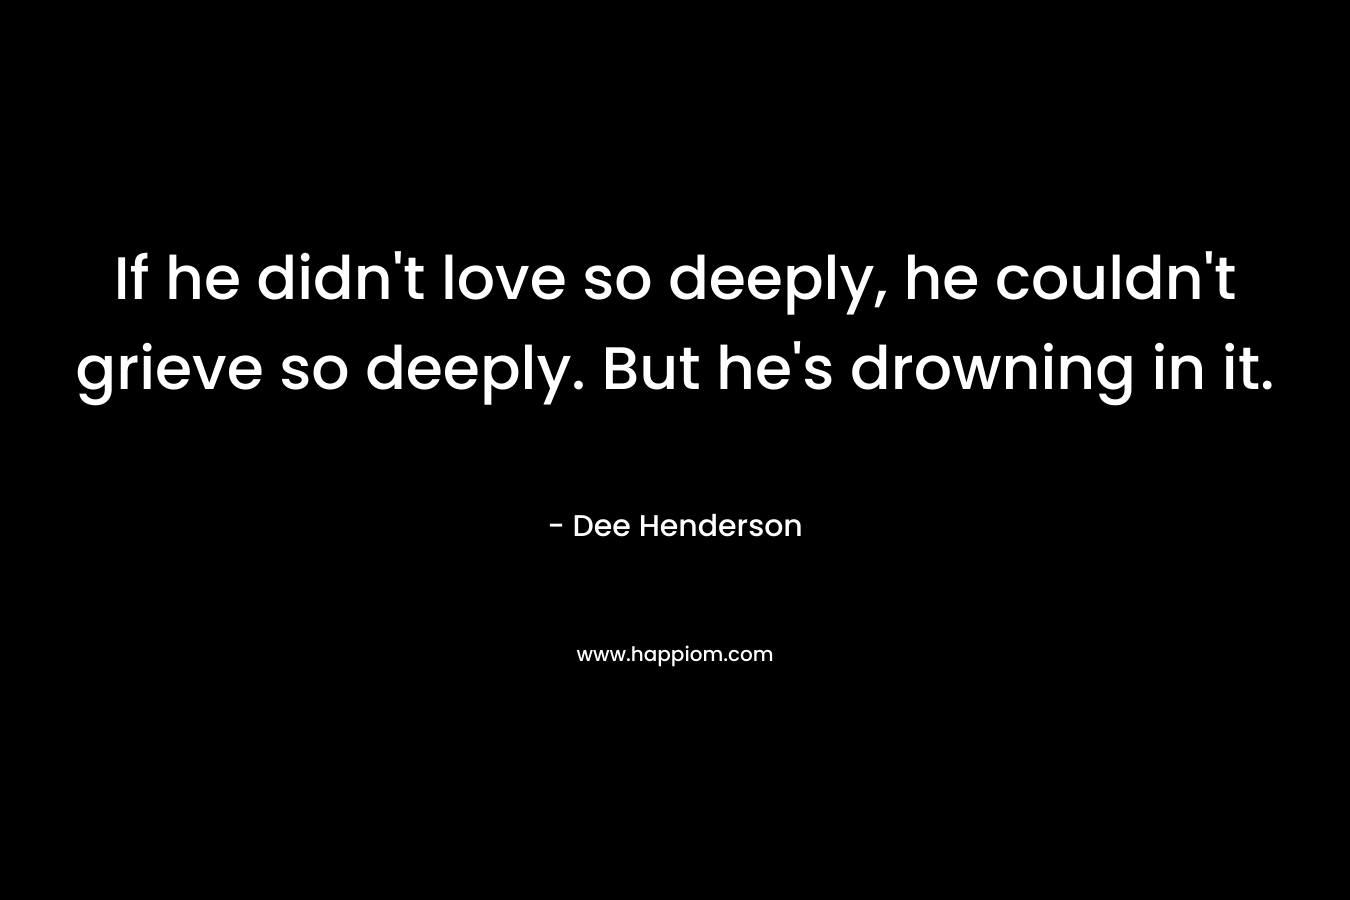 If he didn't love so deeply, he couldn't grieve so deeply. But he's drowning in it.